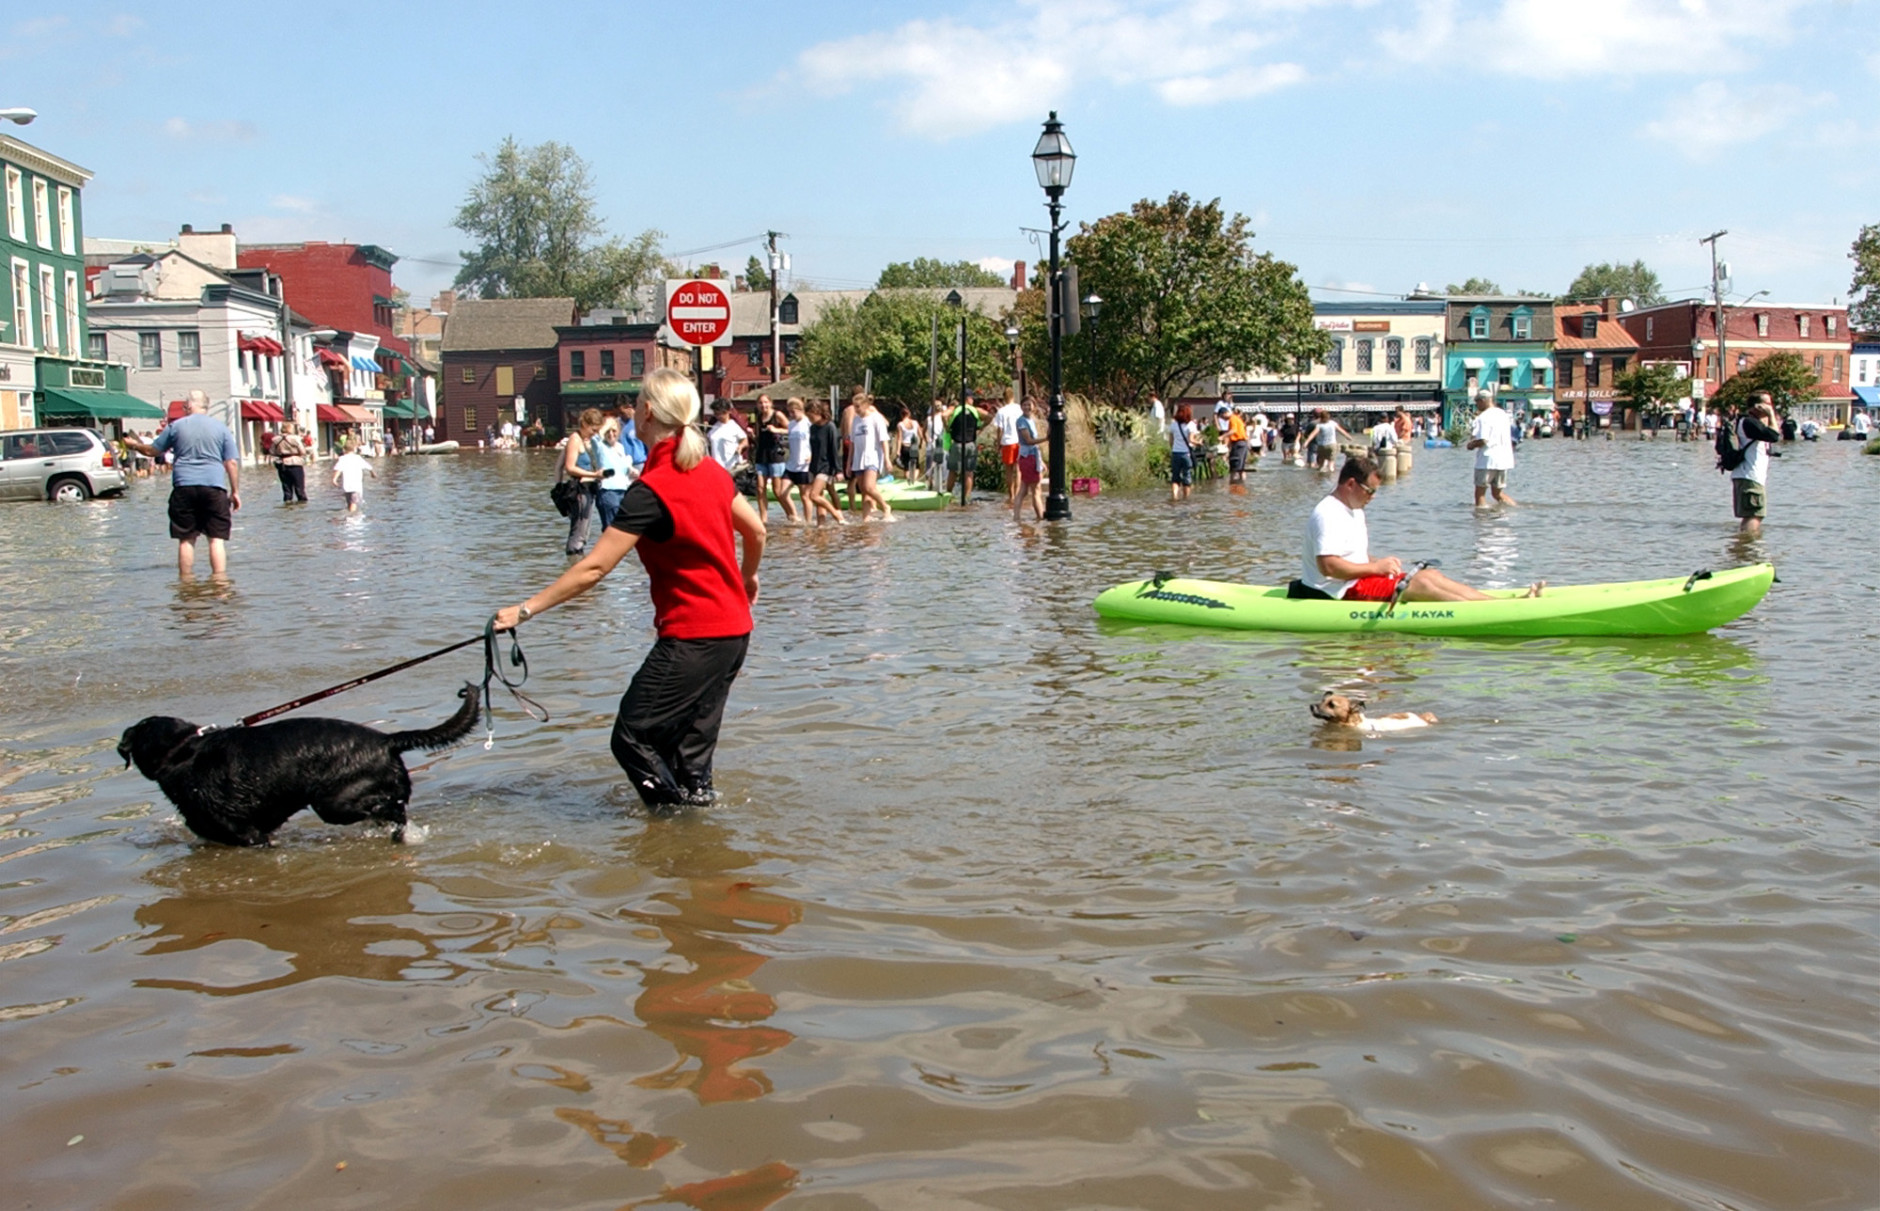 Dozens of people gather in flooded downton Annapolis, Md., Friday, Sept. 19, 2003, to see the water damage from Hurricane Isabel. Rising tides fed by high winds and rains from Isabel pushed water inland to low-lying areas around the Chesapeake Bay and Potomac River early Friday, flooding homes and businesses. (AP Photo/Susan Walsh)